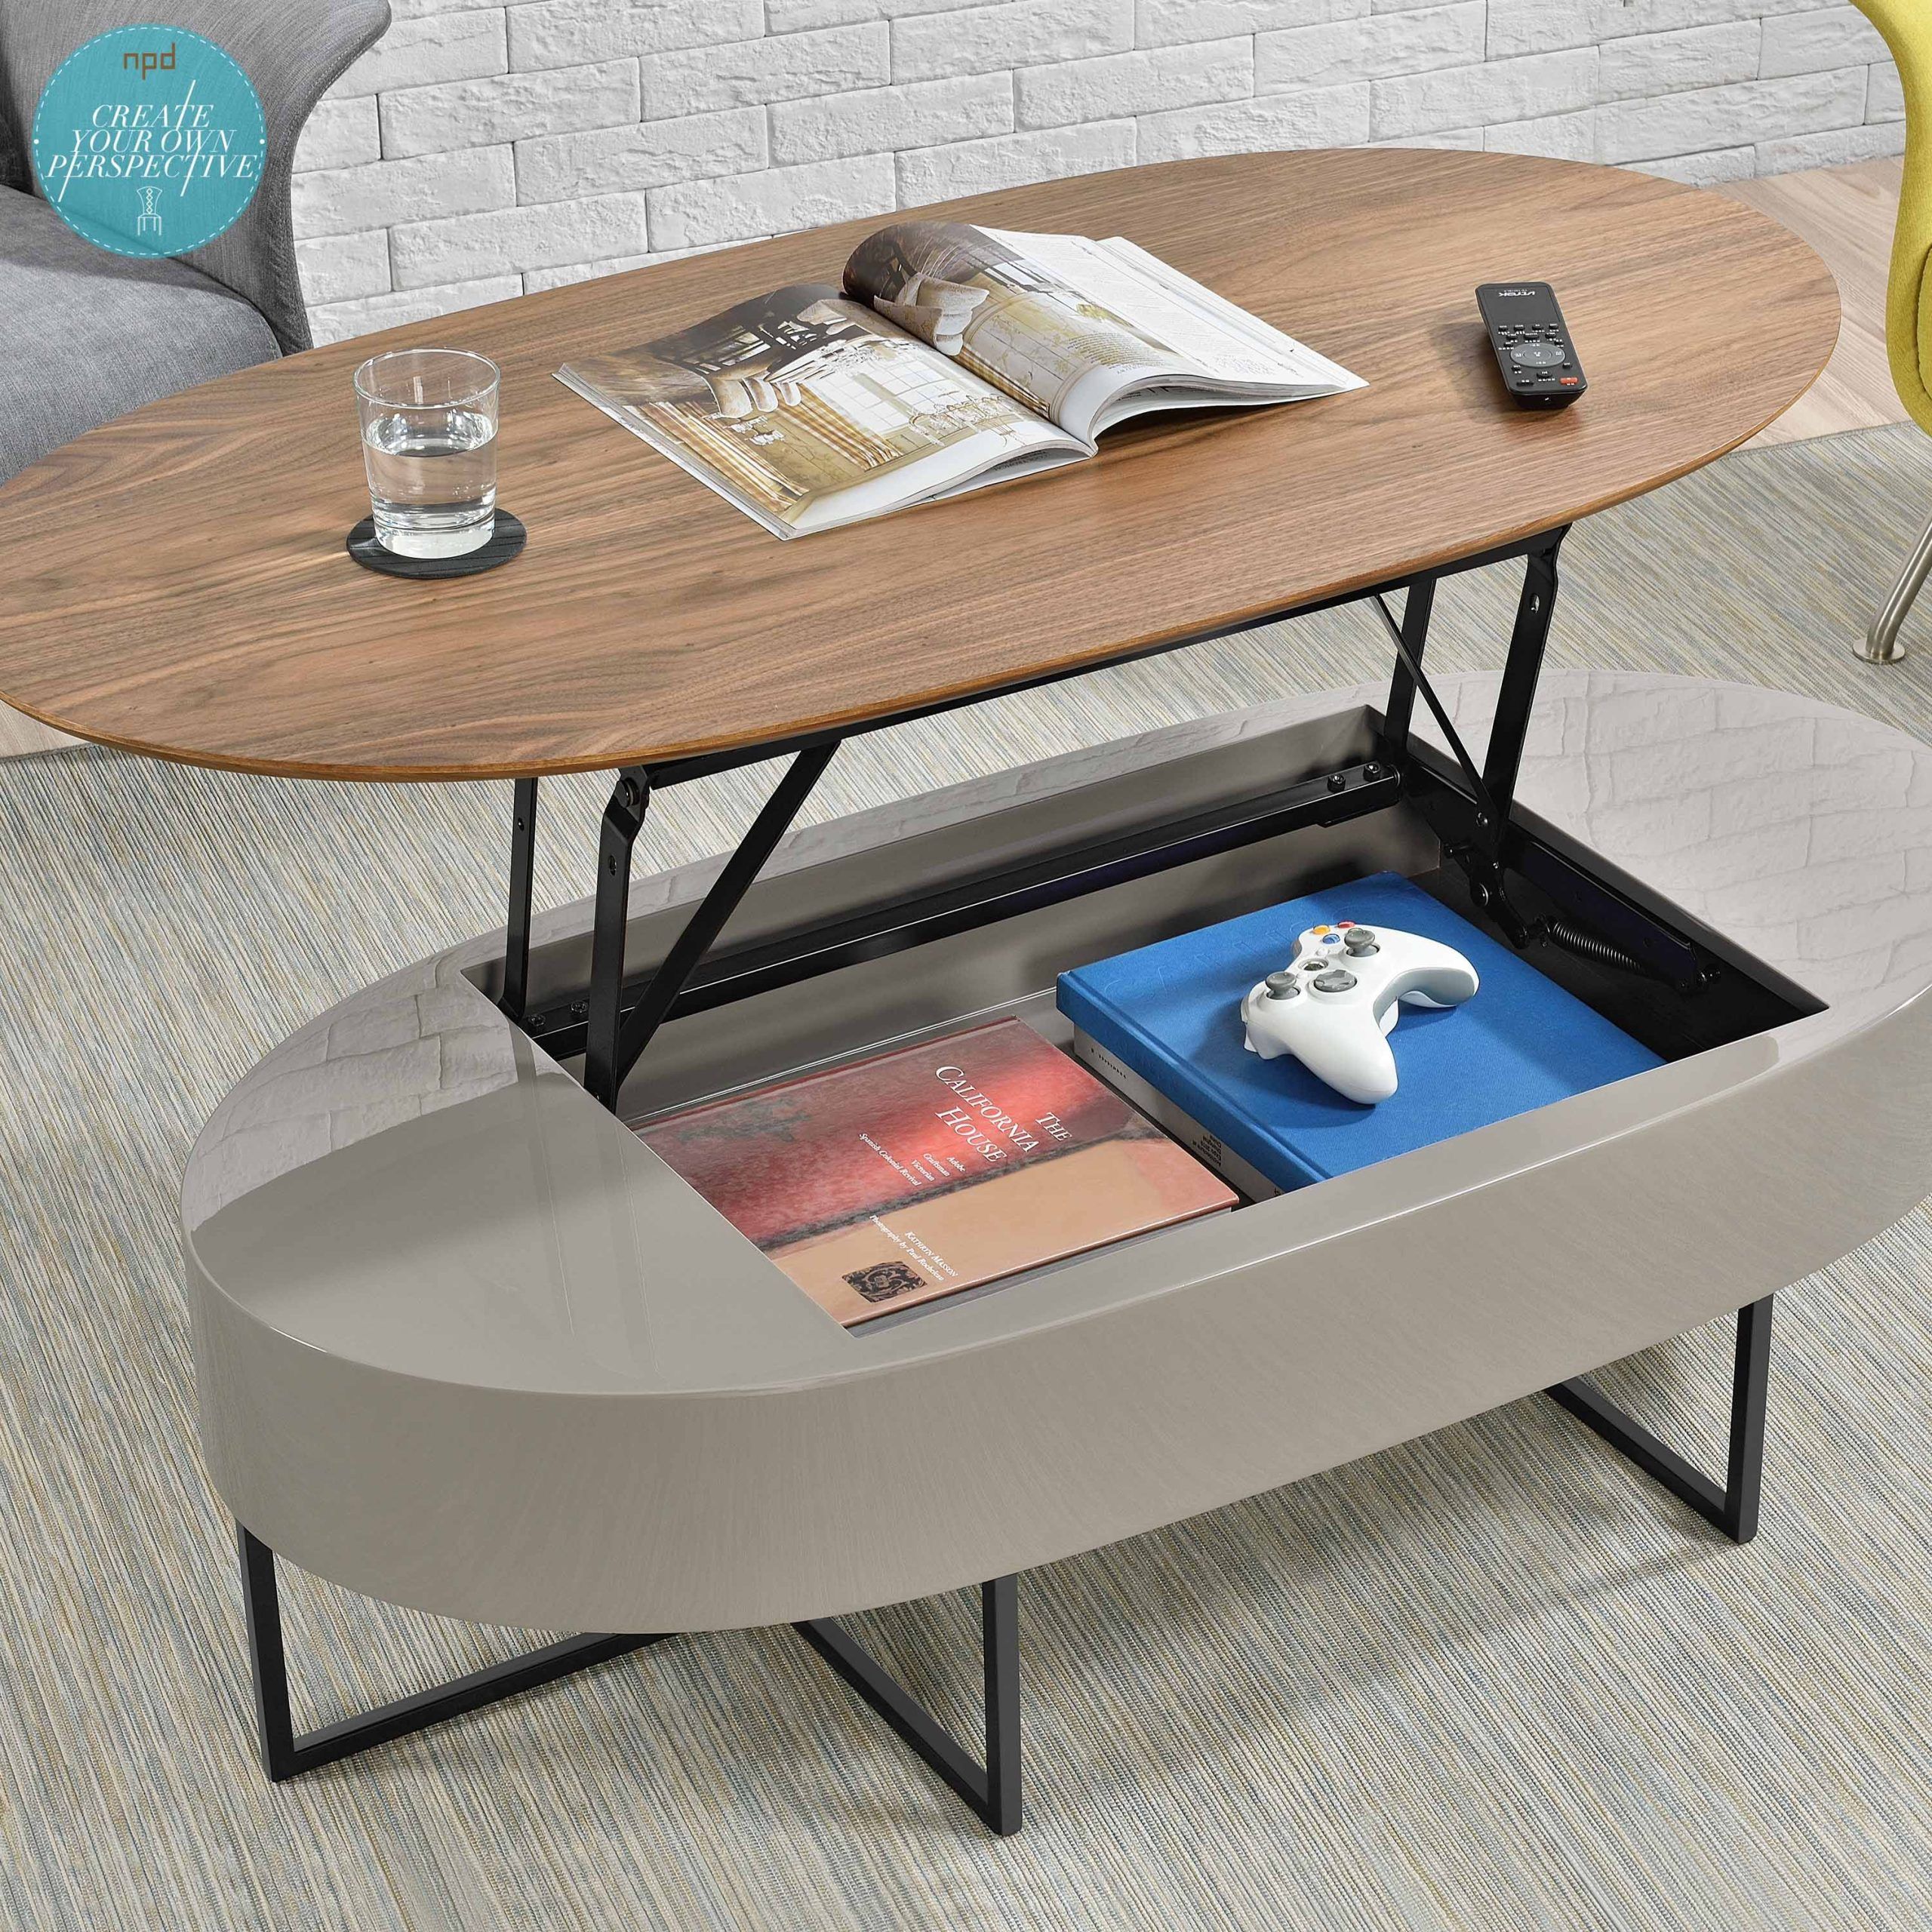 Consider This Multi Functional Oval Lift Top Table If You're Moving To With Modern Wooden Lift Top Tables (View 7 of 15)